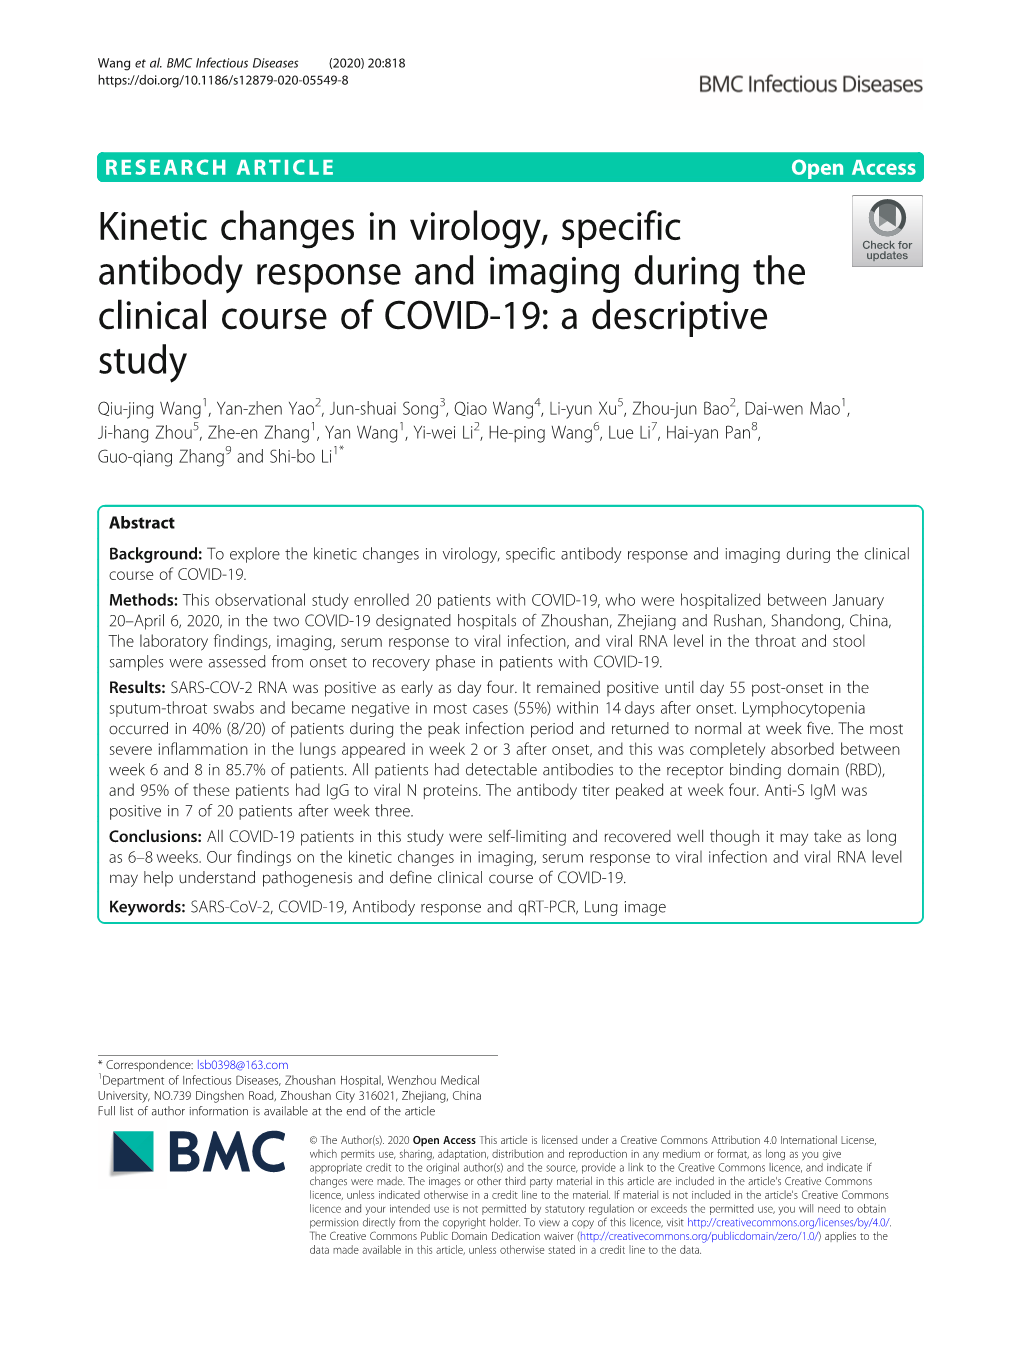 Kinetic Changes in Virology, Specific Antibody Response and Imaging